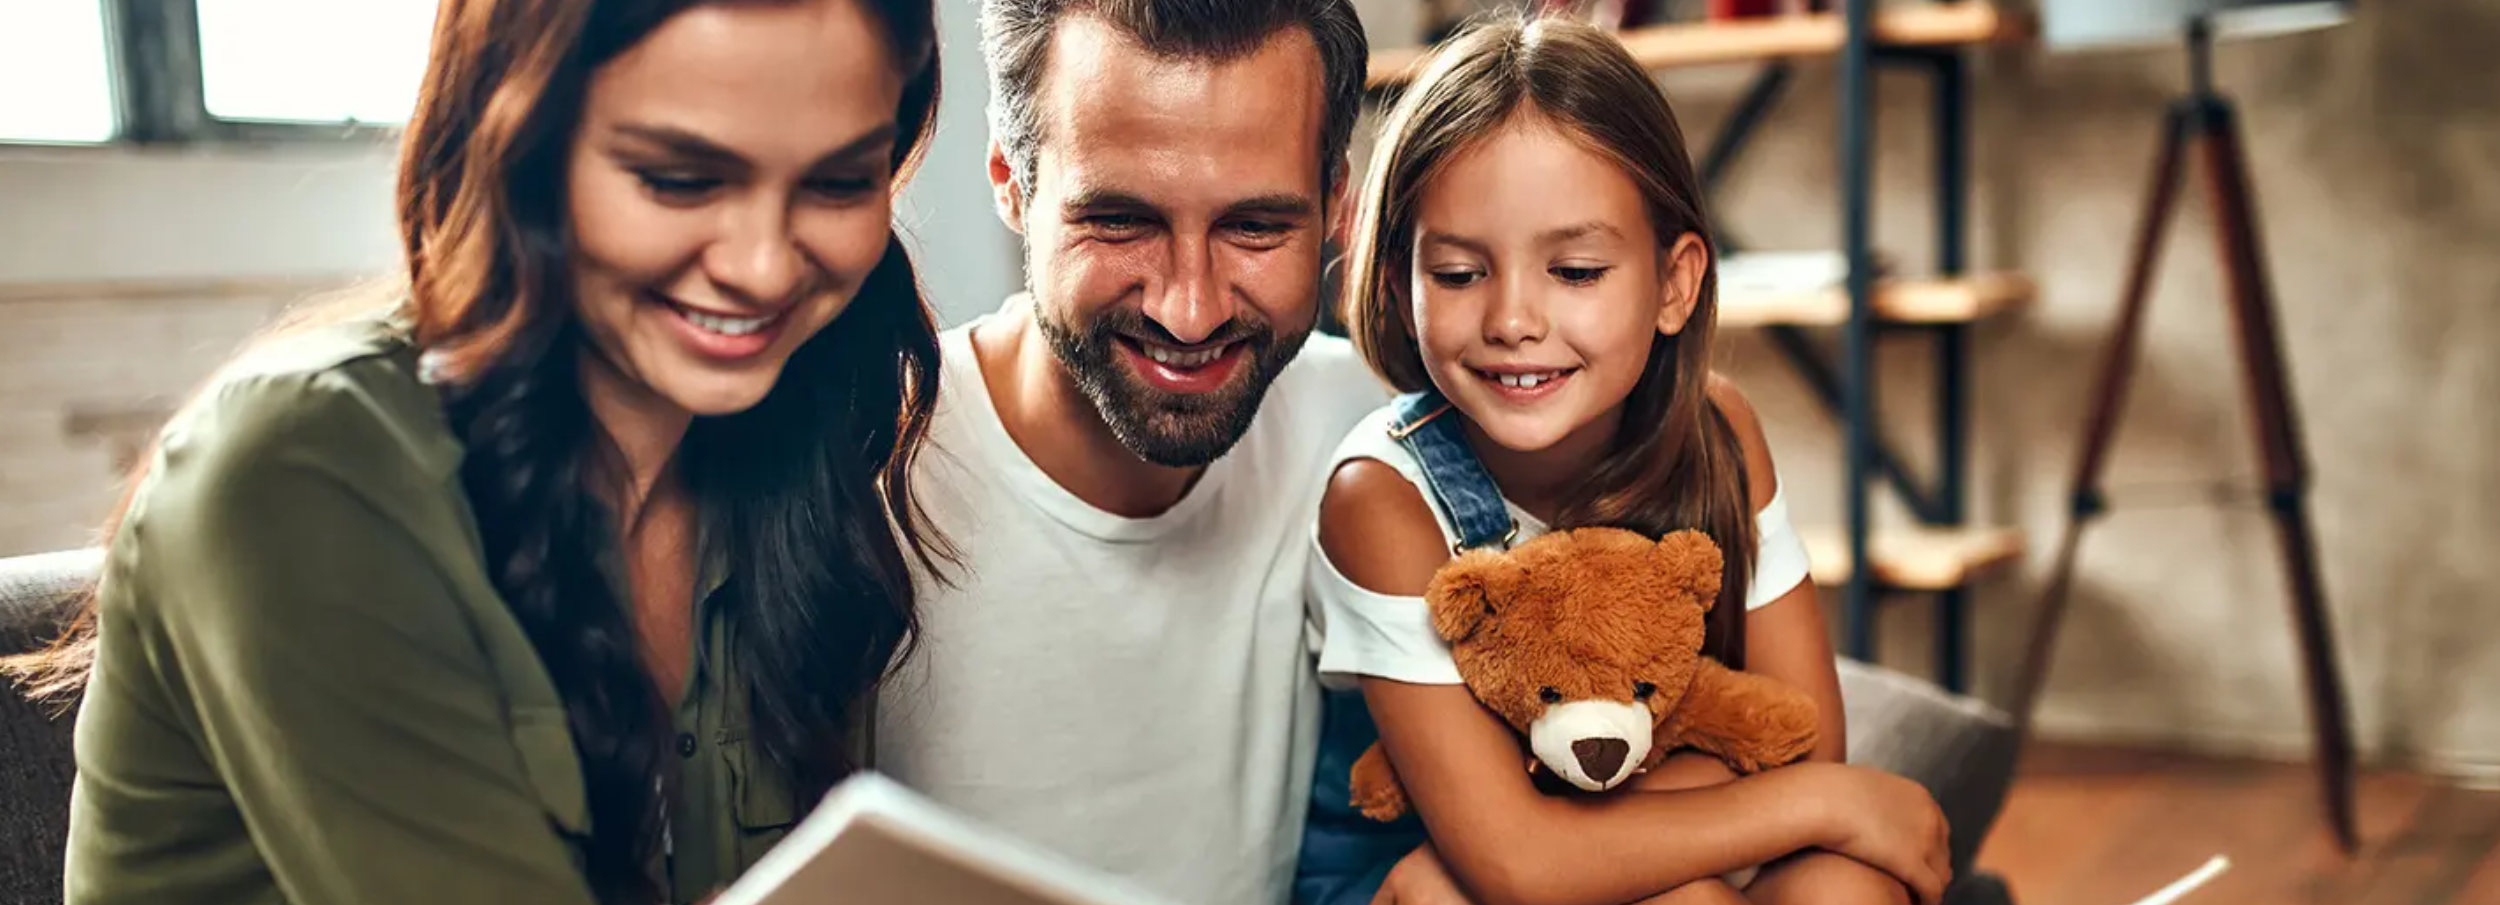 Smiling mother, father and daughter holding teddy bear in residential interior.